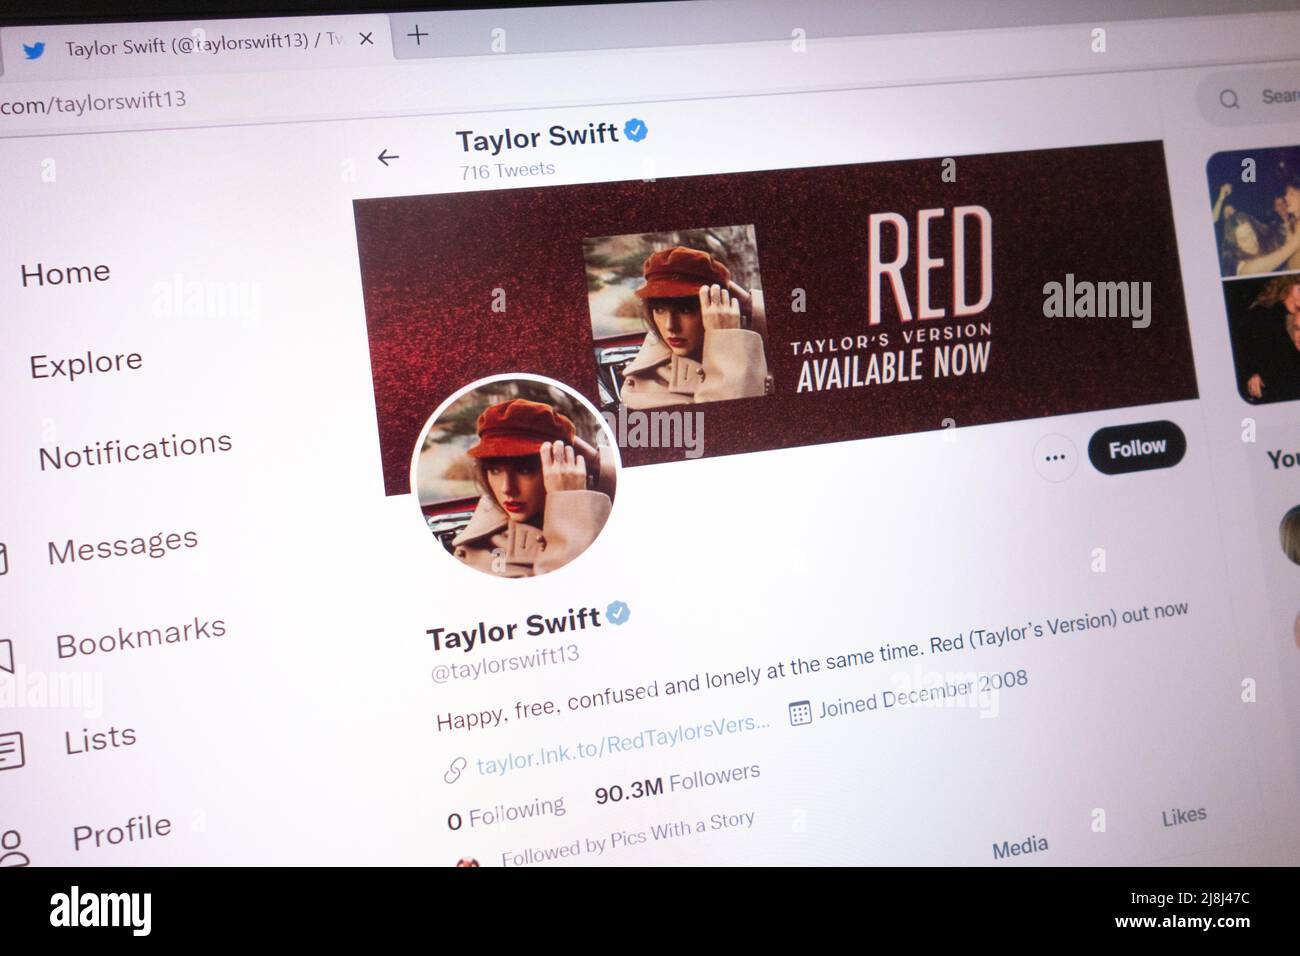 KONSKIE, POLAND - May 14, 2022: Taylor Swift official Twitter account displayed on laptop screen Stock Photo